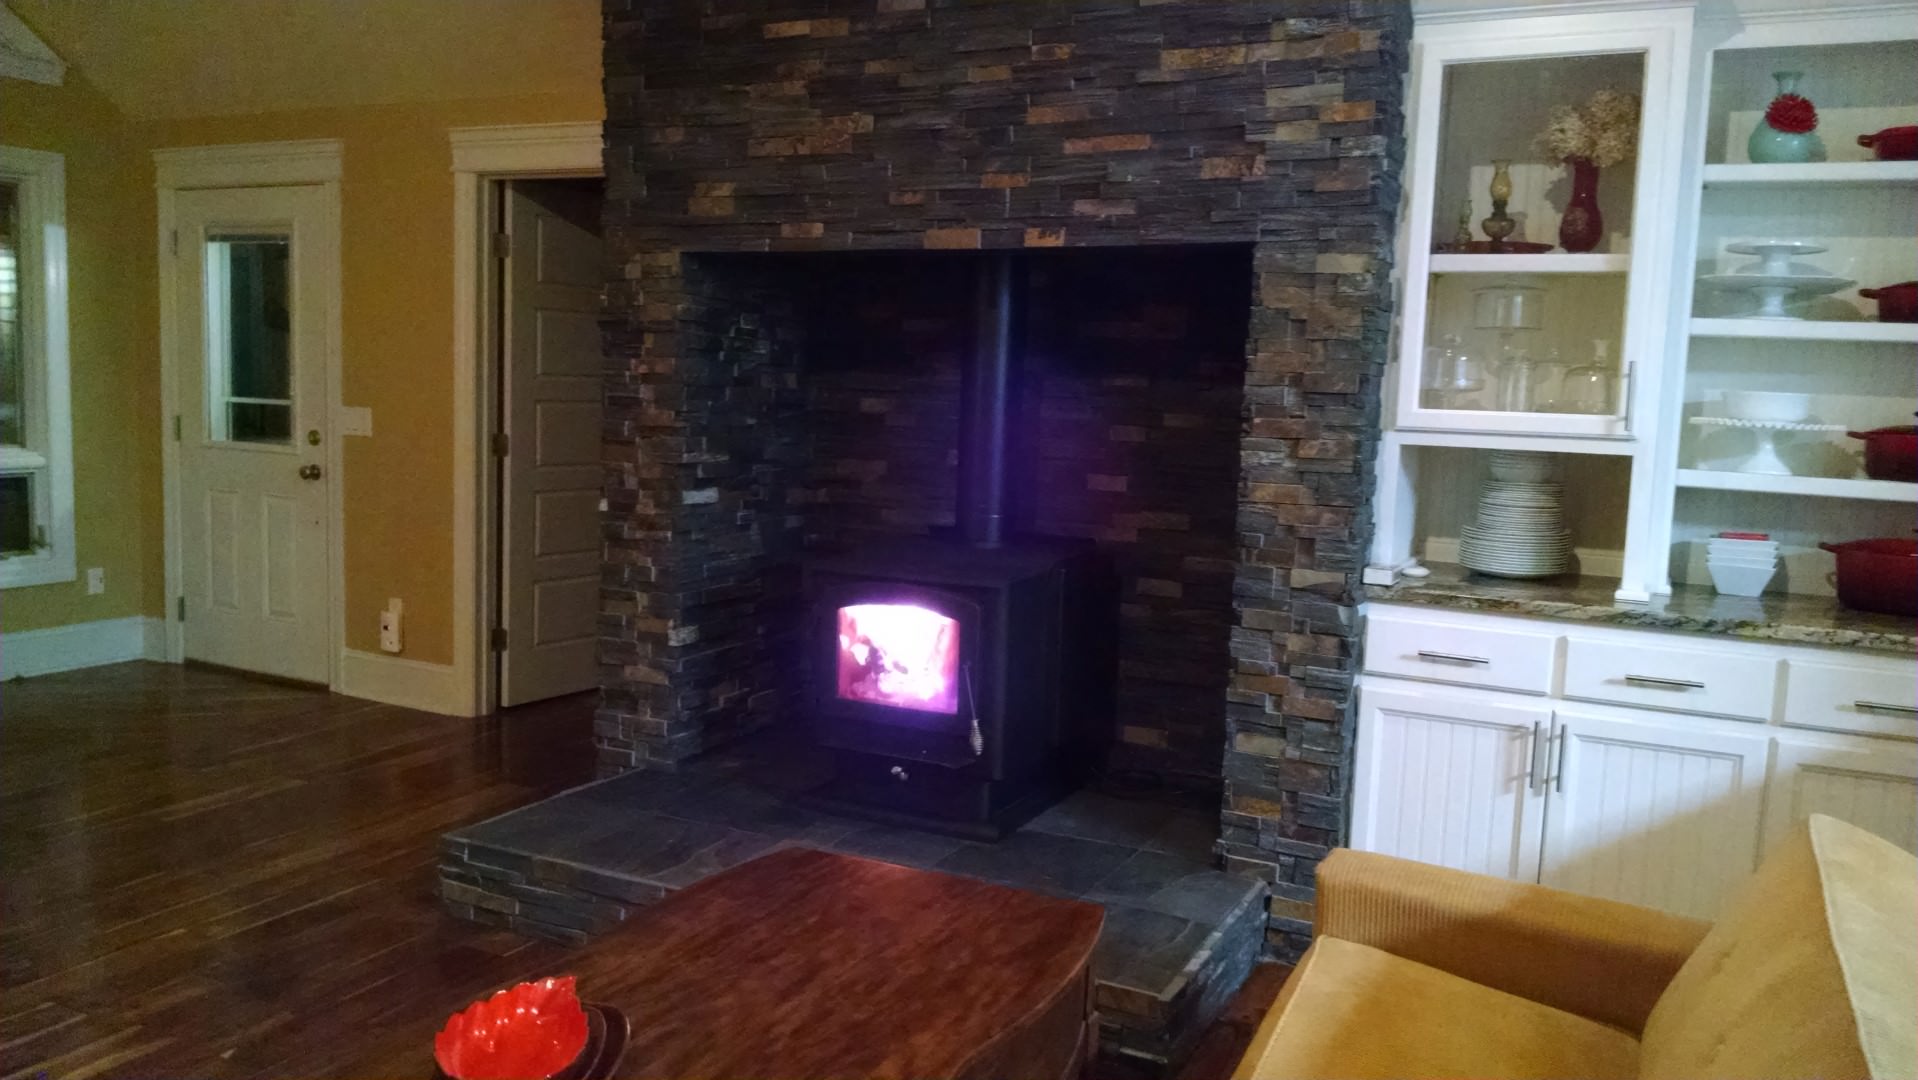 Clearances with Insert Wood Stove